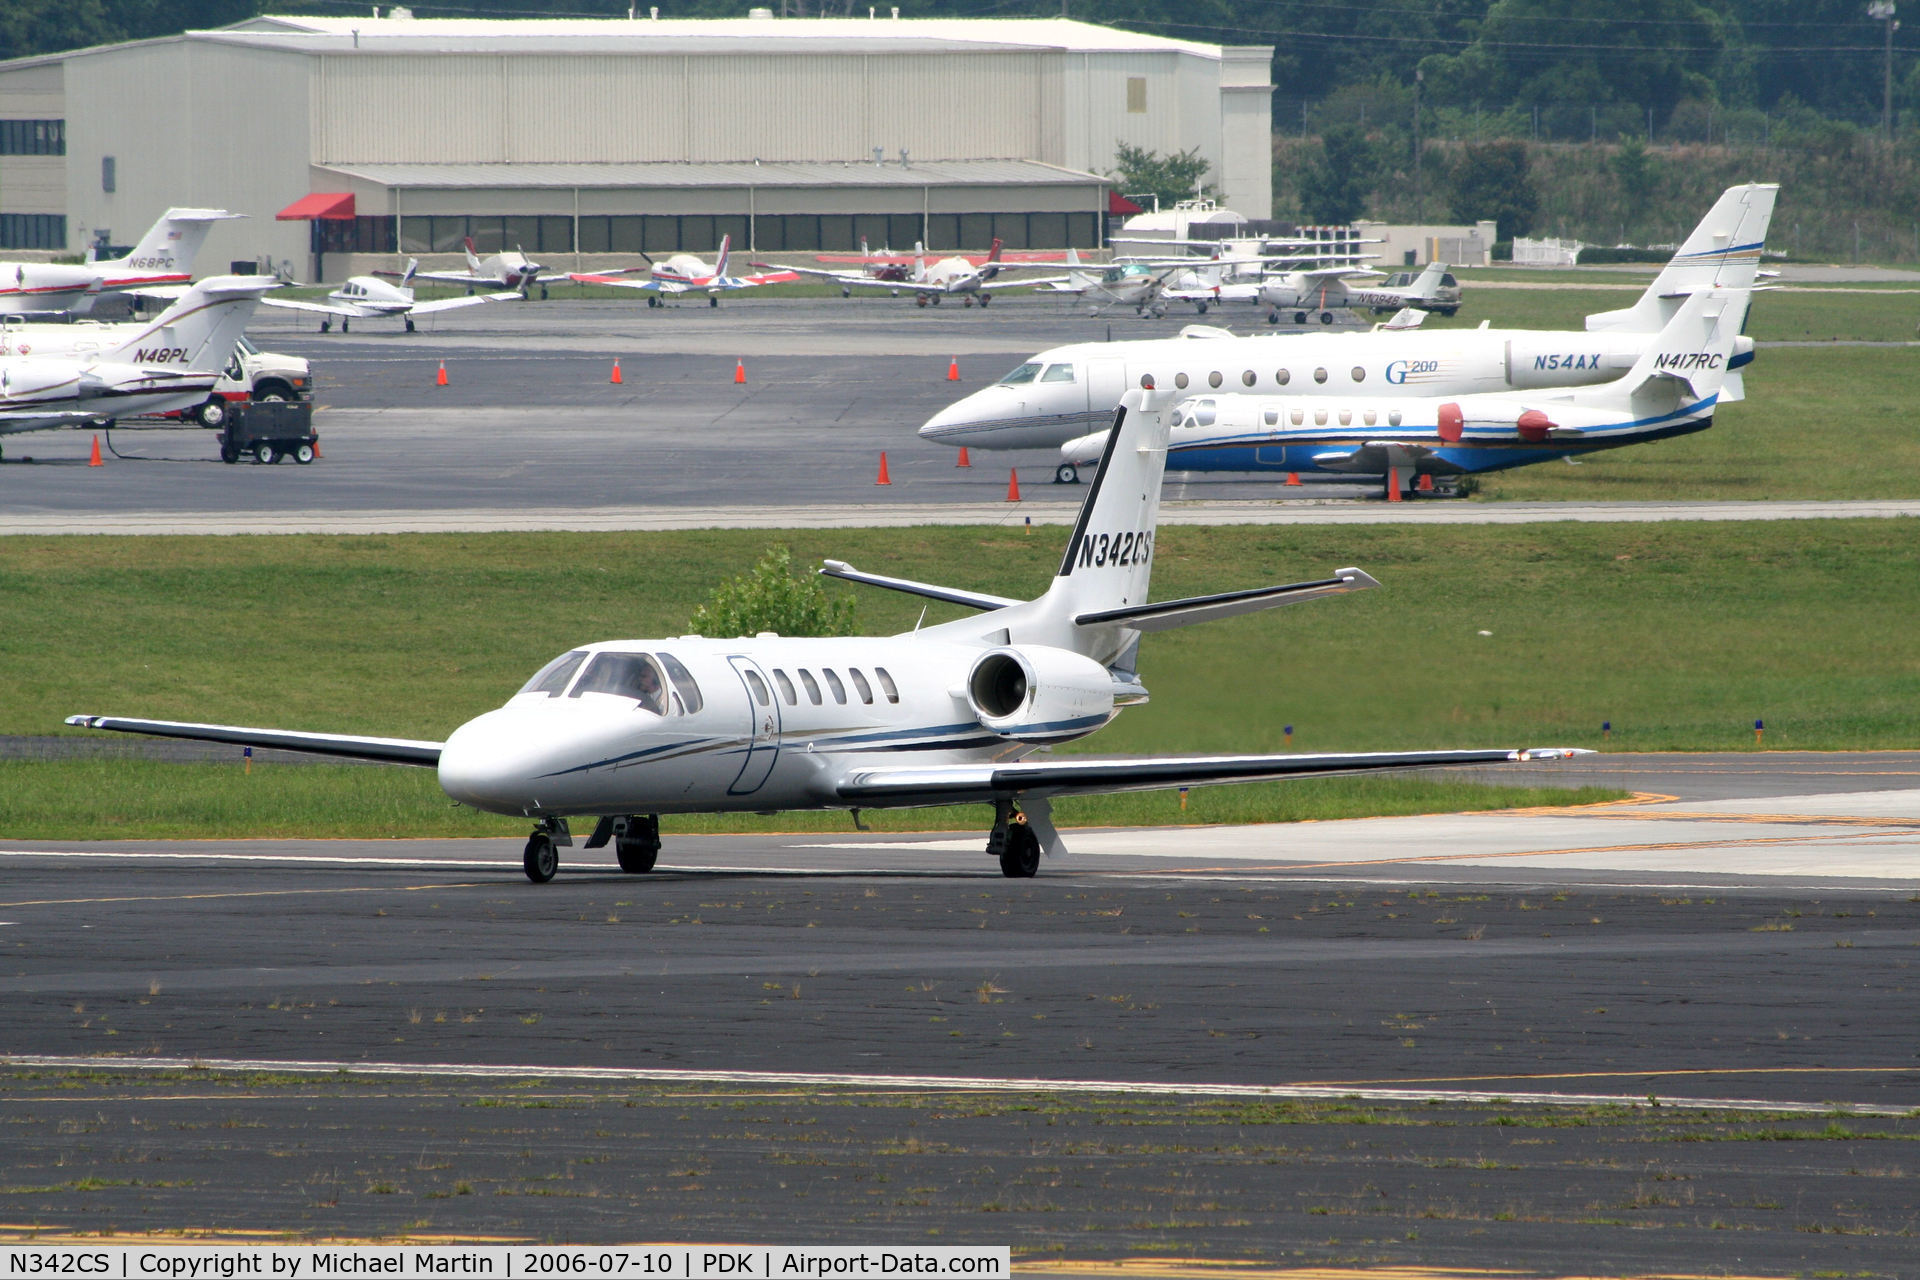 N342CS, 2005 Cessna 550 C/N 550-1101, Taxing to Epps Air Service